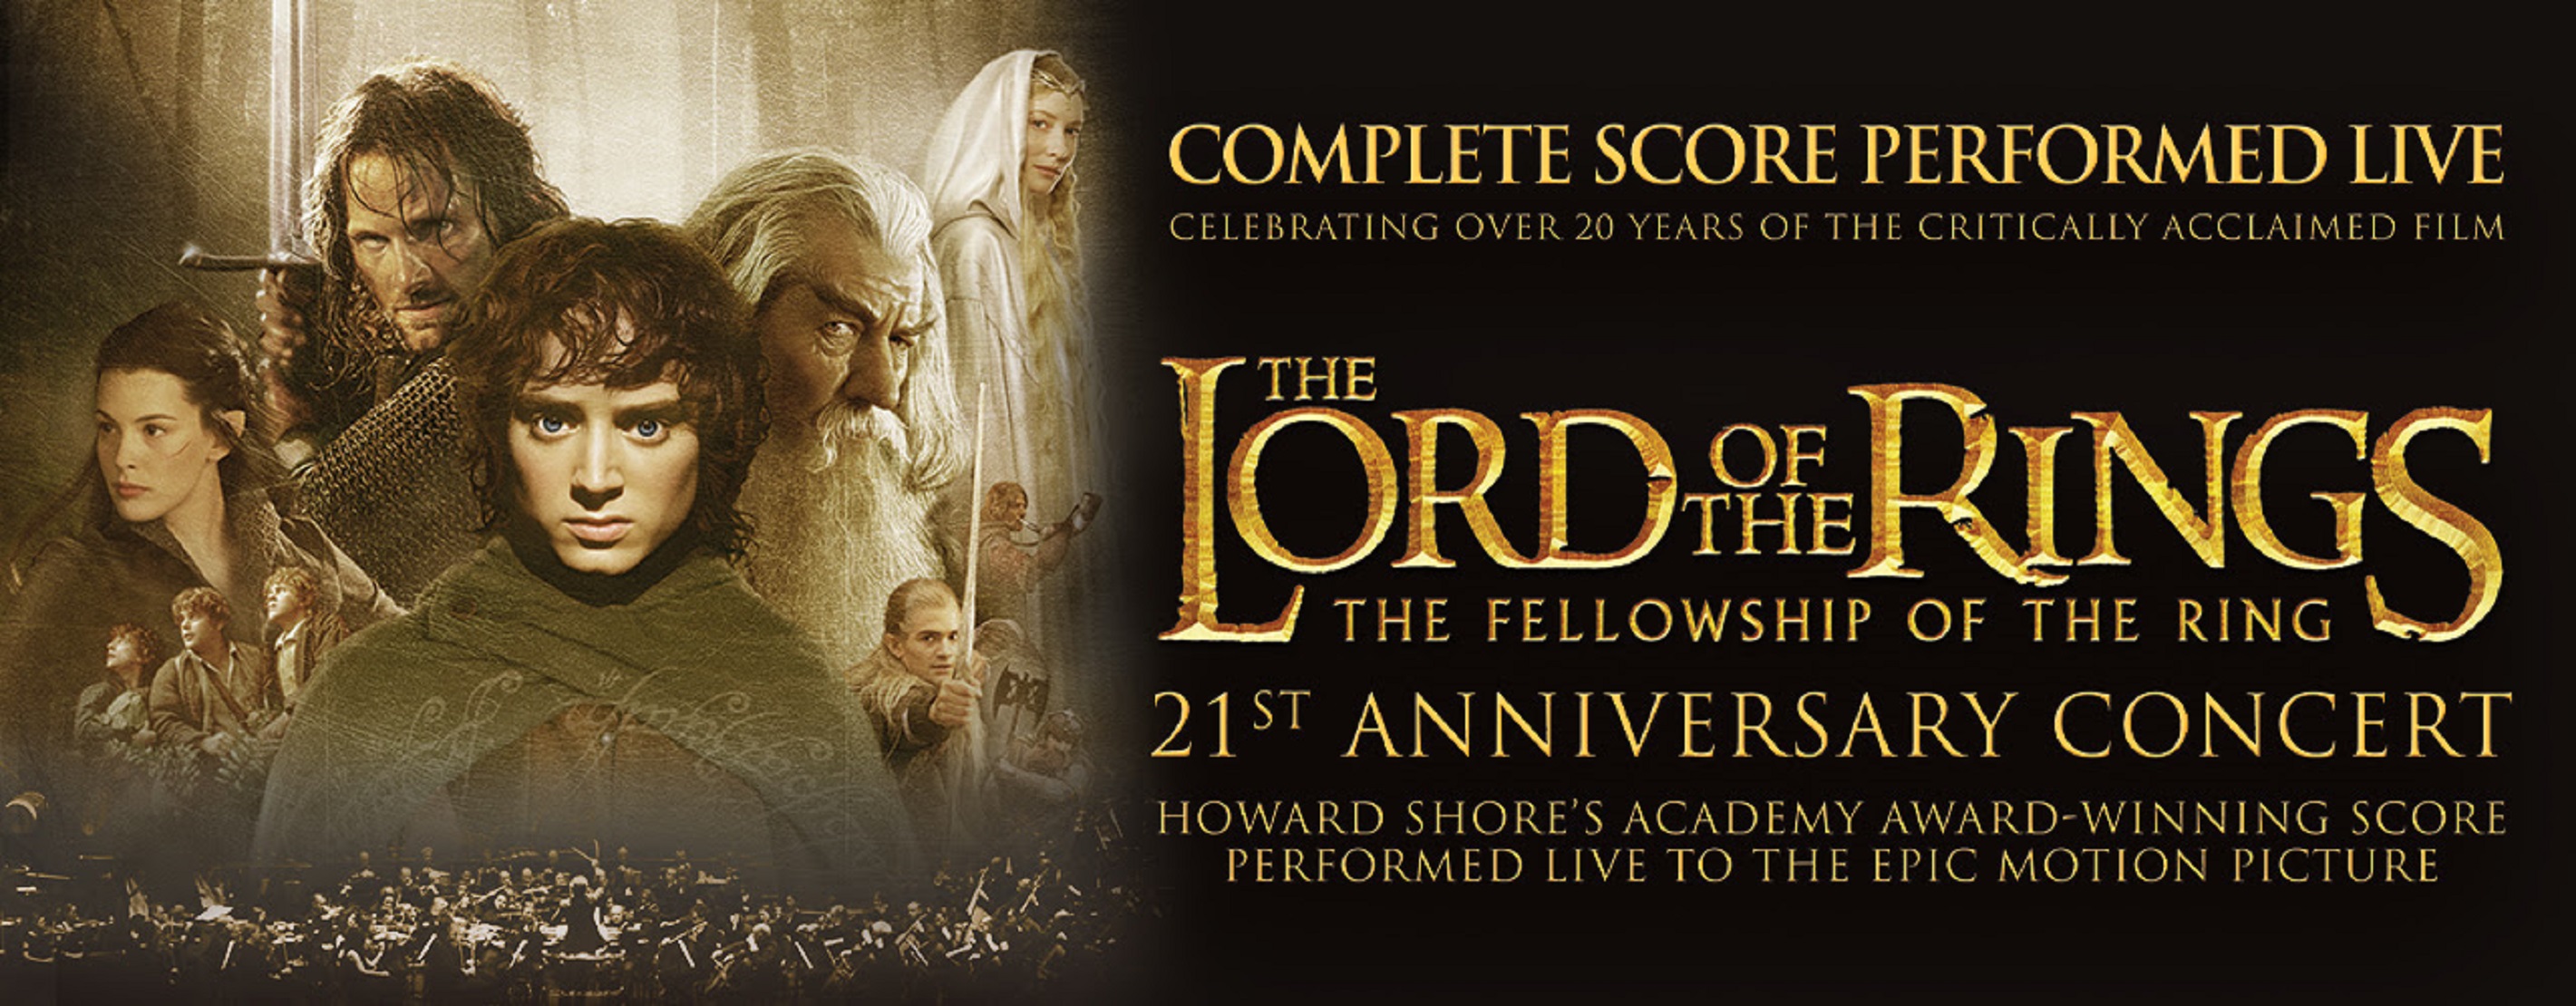 The Lord of the Rings: The Fellowship of the Ring 21st Anniversary Concert